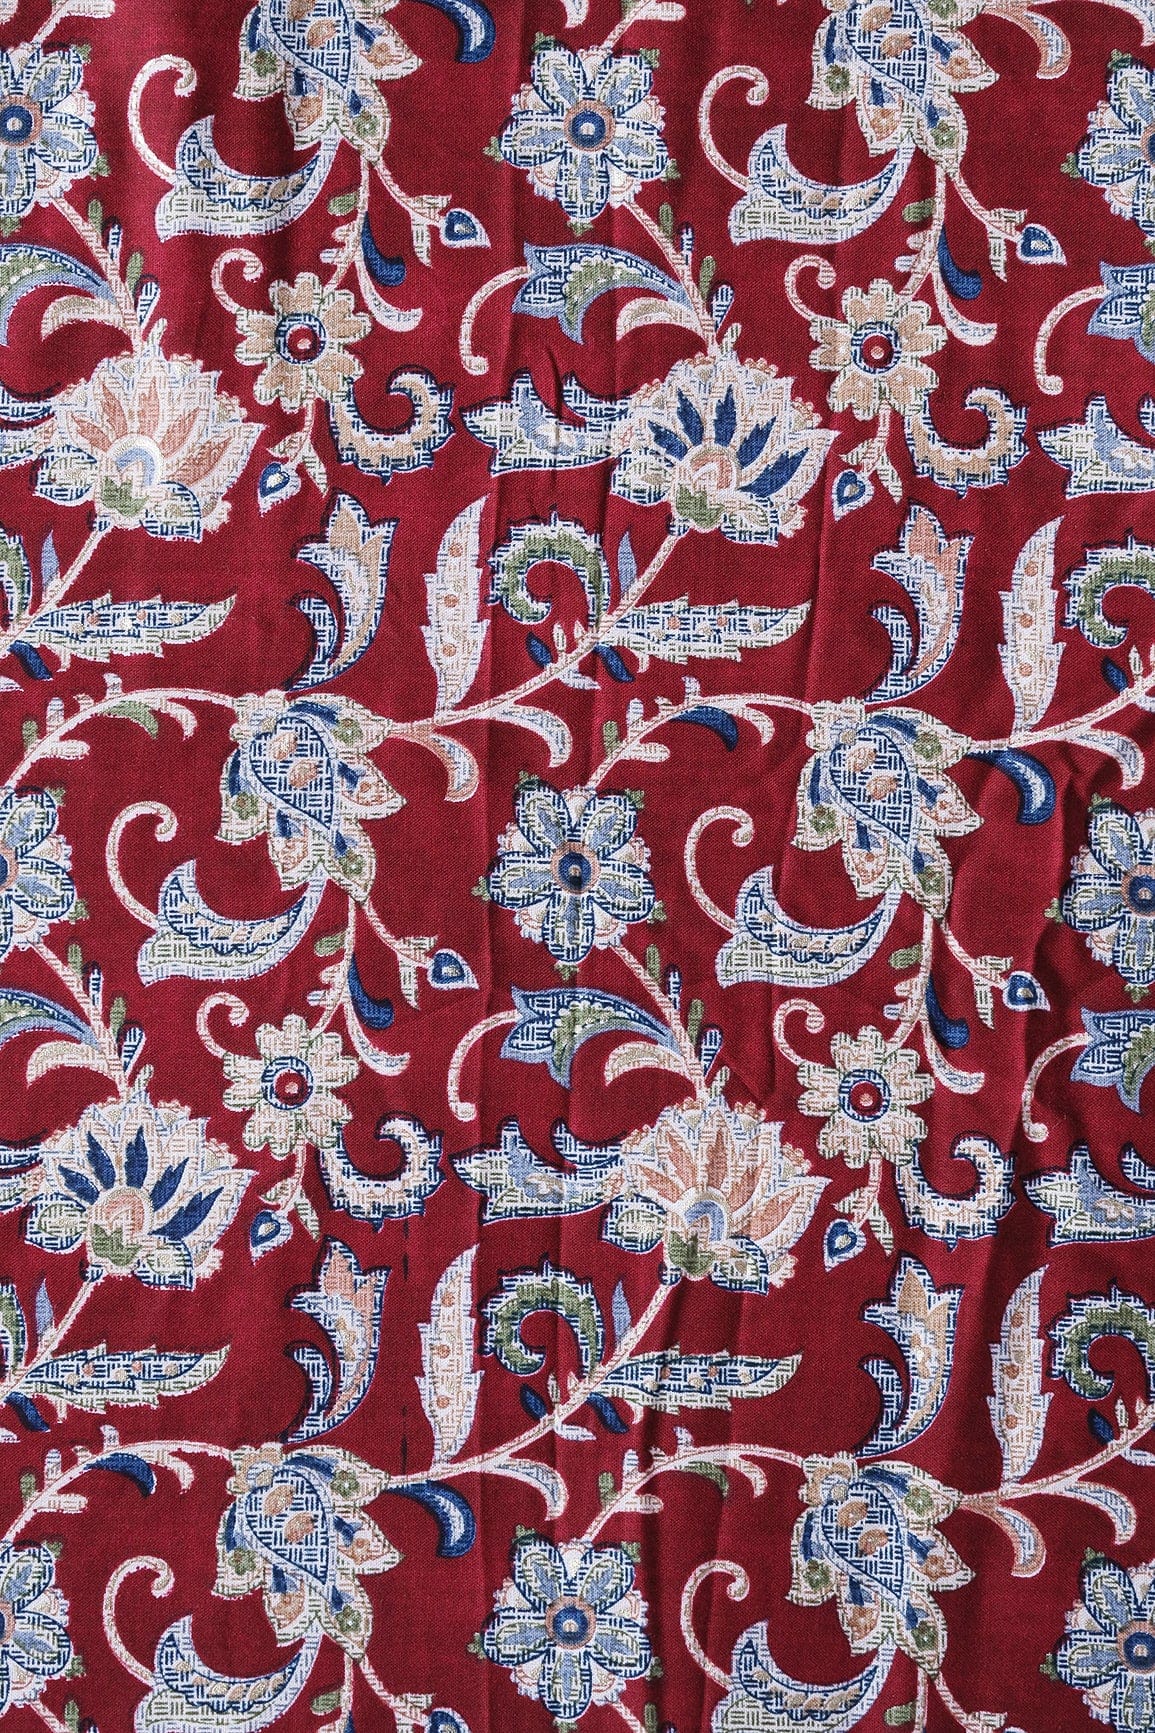 doeraa Prints Multi Color Floral Pattern With Foil Print On Maroon Rayon Fabric